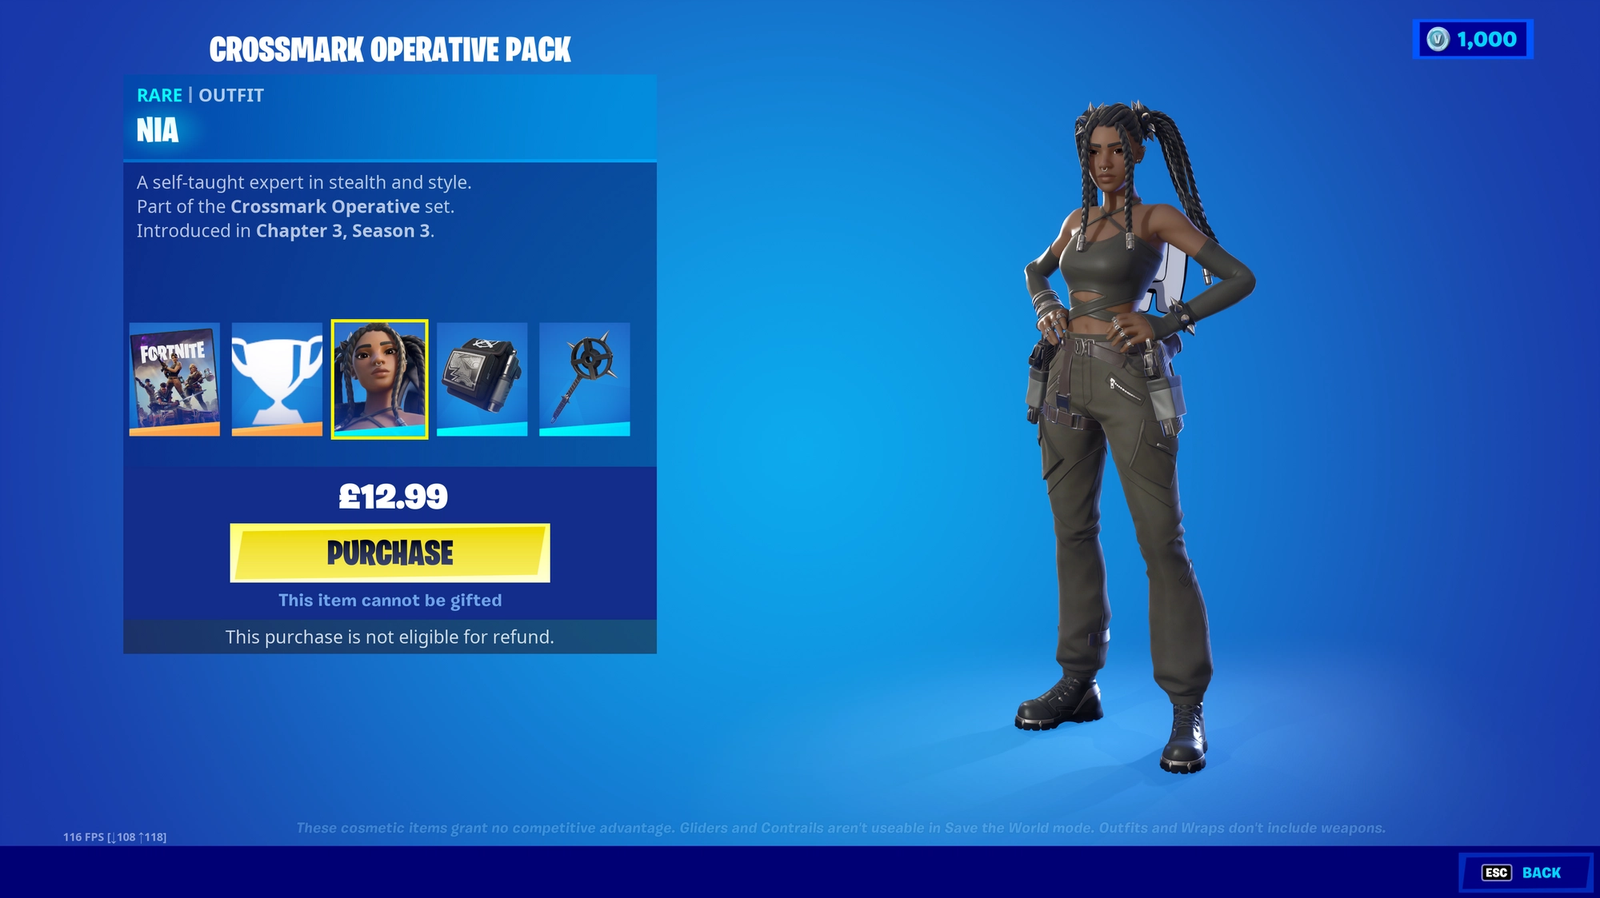 Nia is an outfit unlocked by the Fortnite Crossmark Operative Pack